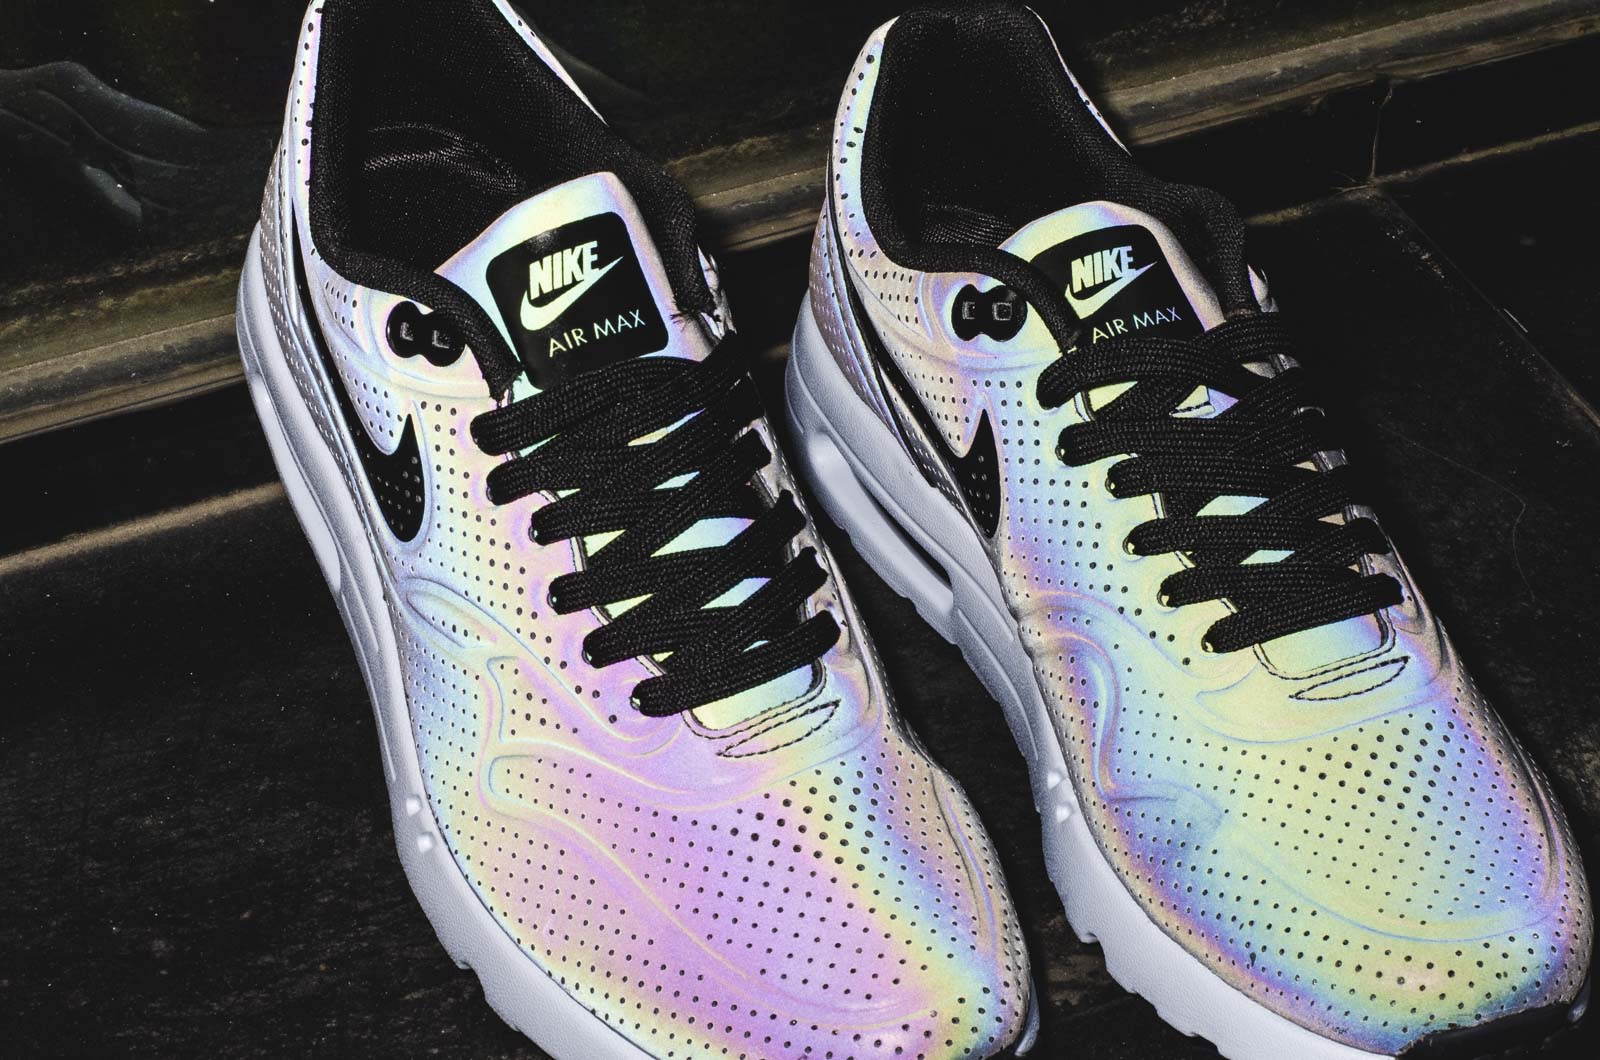 Nike Air Max 1 Ultra Moire "Iridescent" –